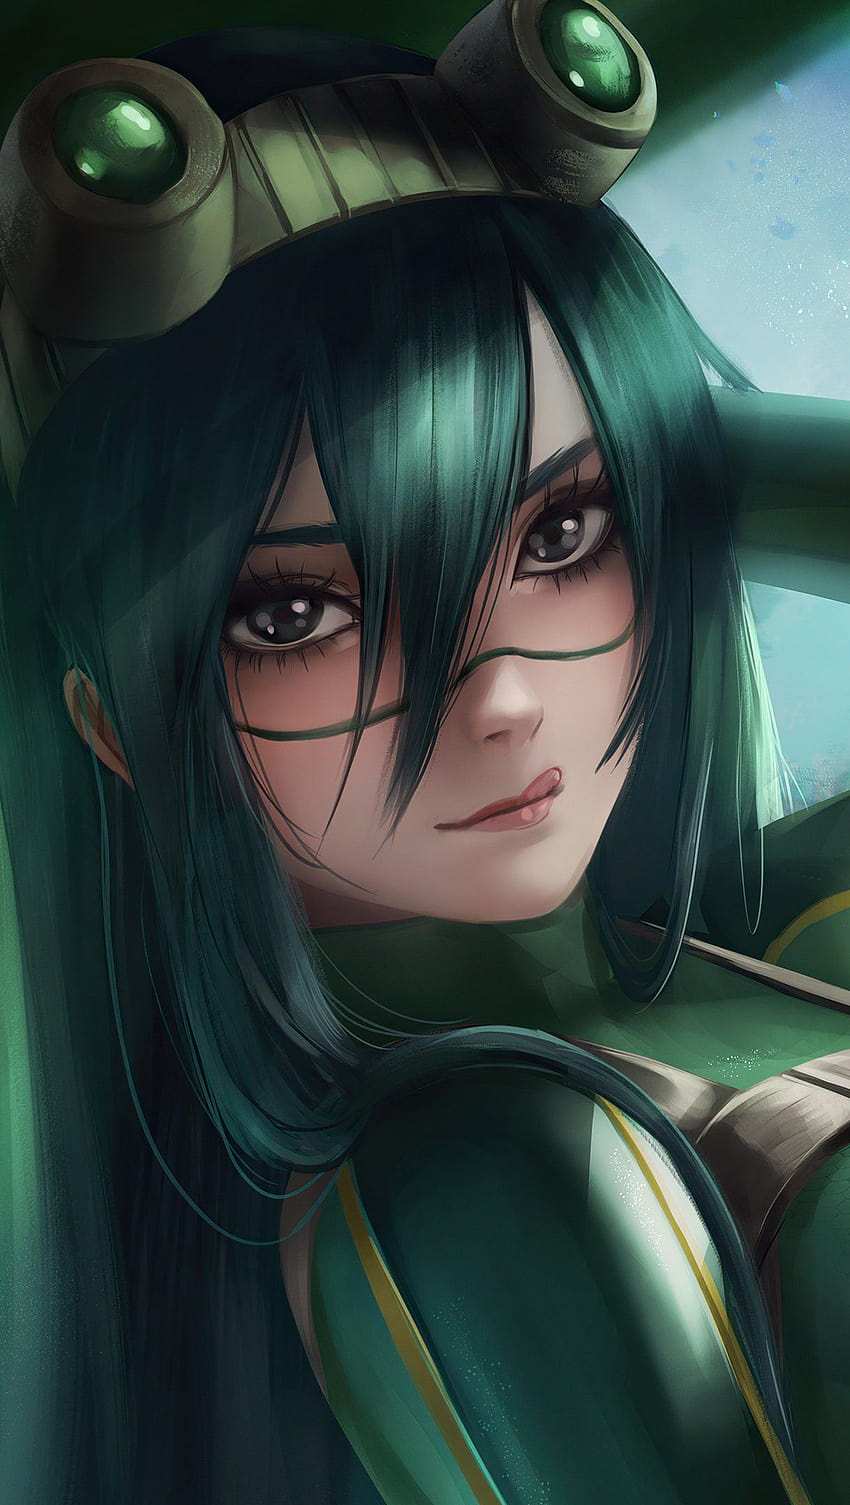 Anime Girl Green Hair - 100 Best Pictures and Images